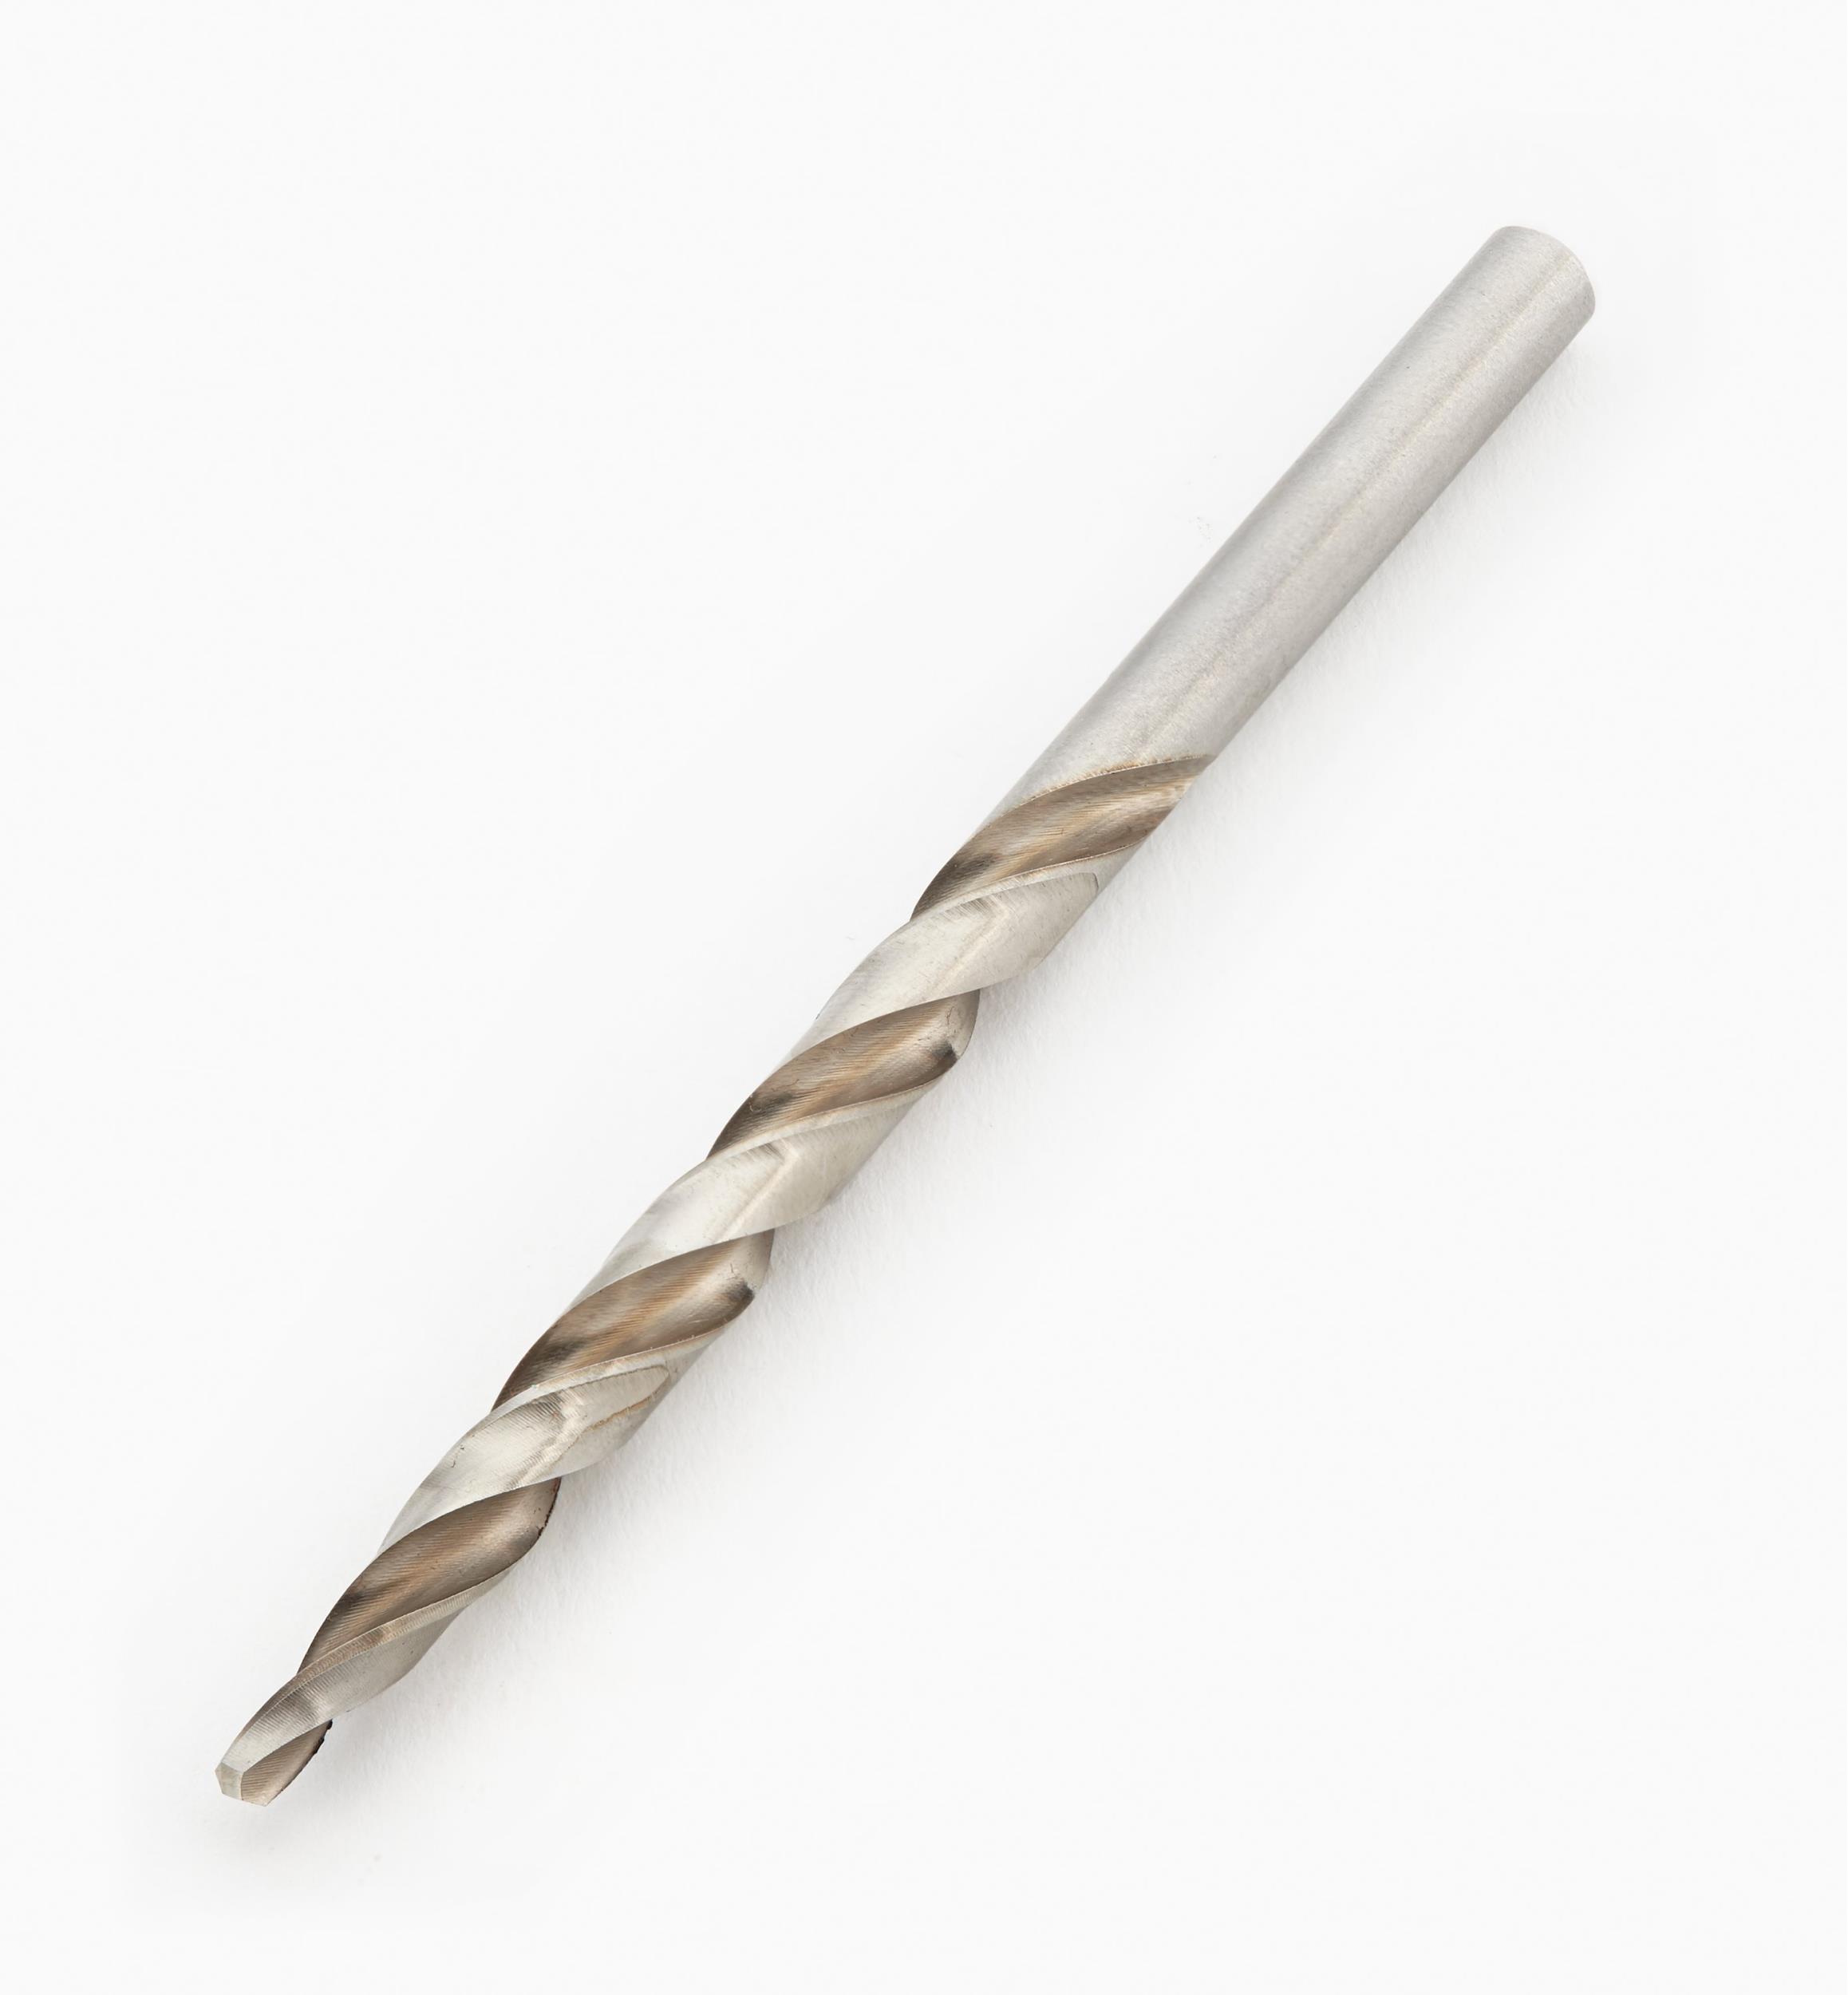 why use tapered drill bits? 2